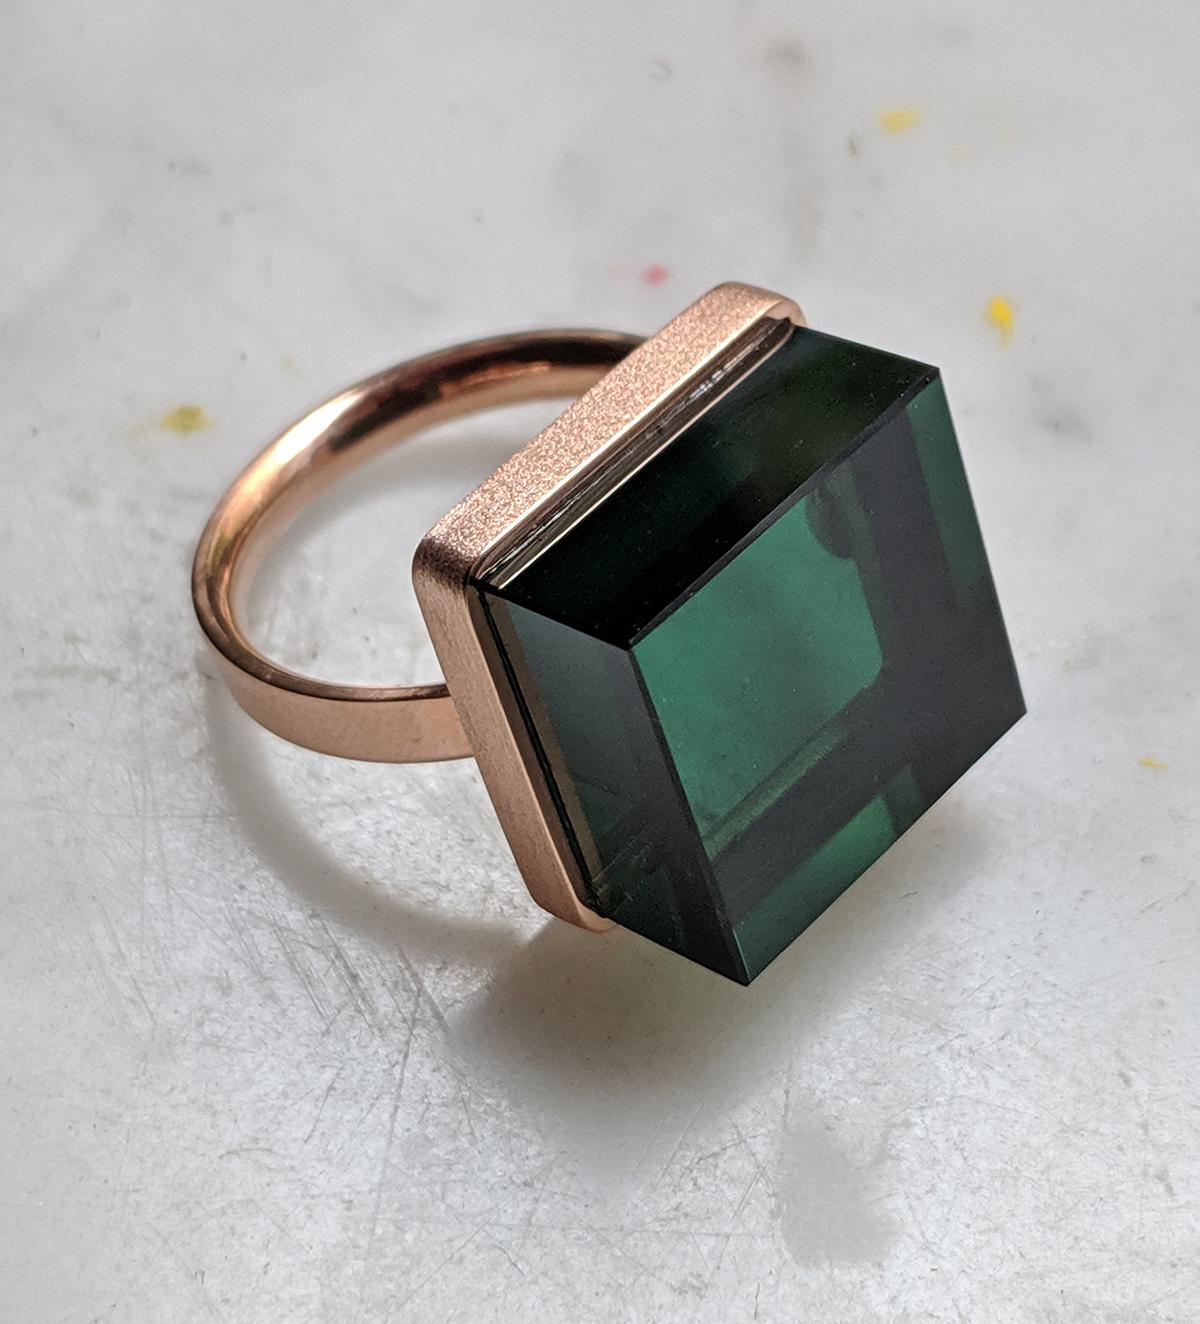 Featured in Vogue Rose Gold Art Deco Style Ring with Green Quartz For Sale 2